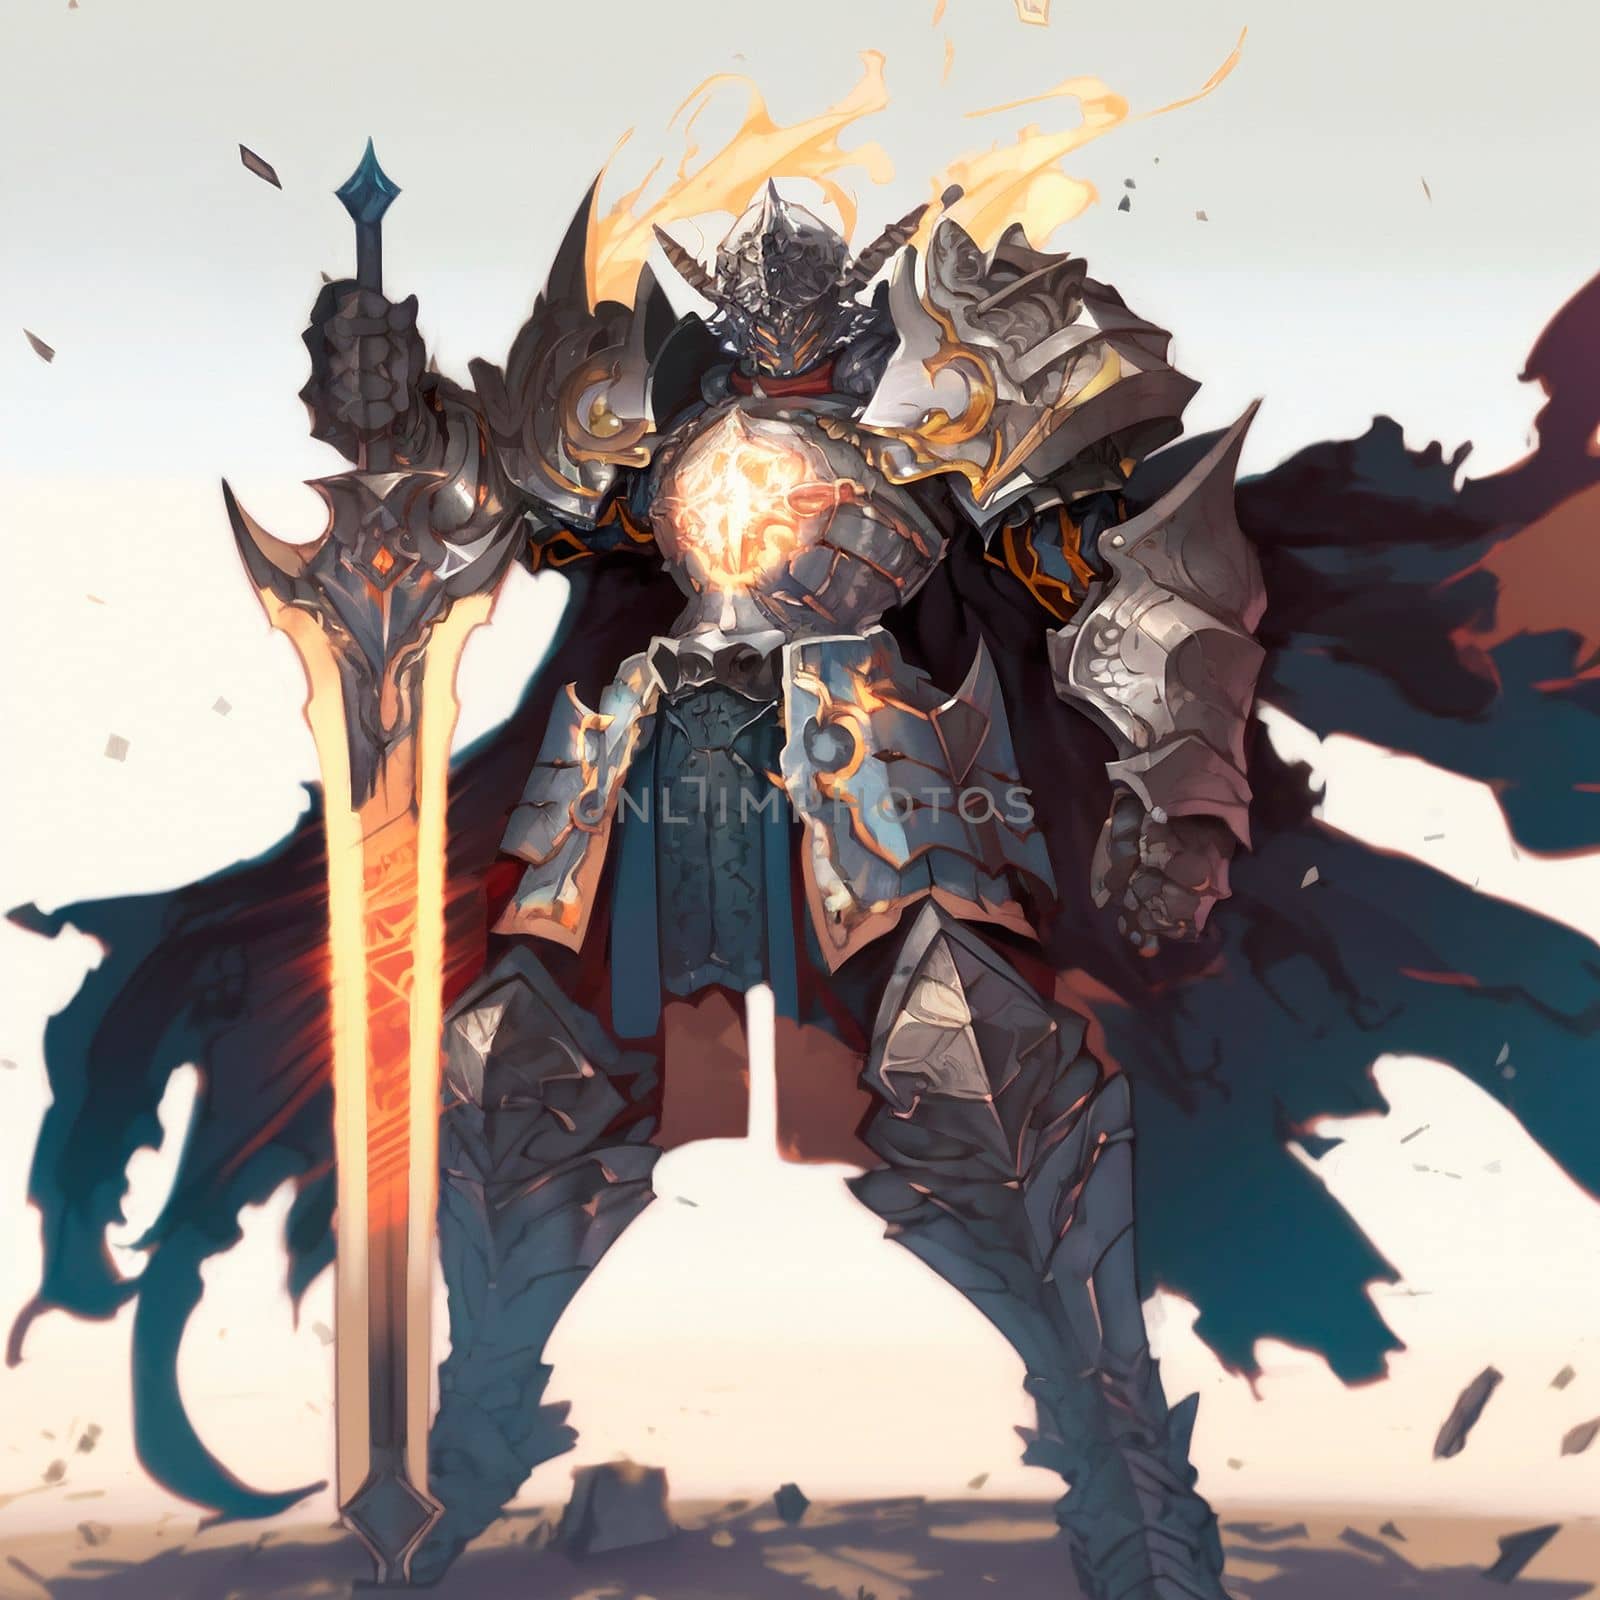 A stern knight in heavy armor in the style of fantasy. High quality illustration